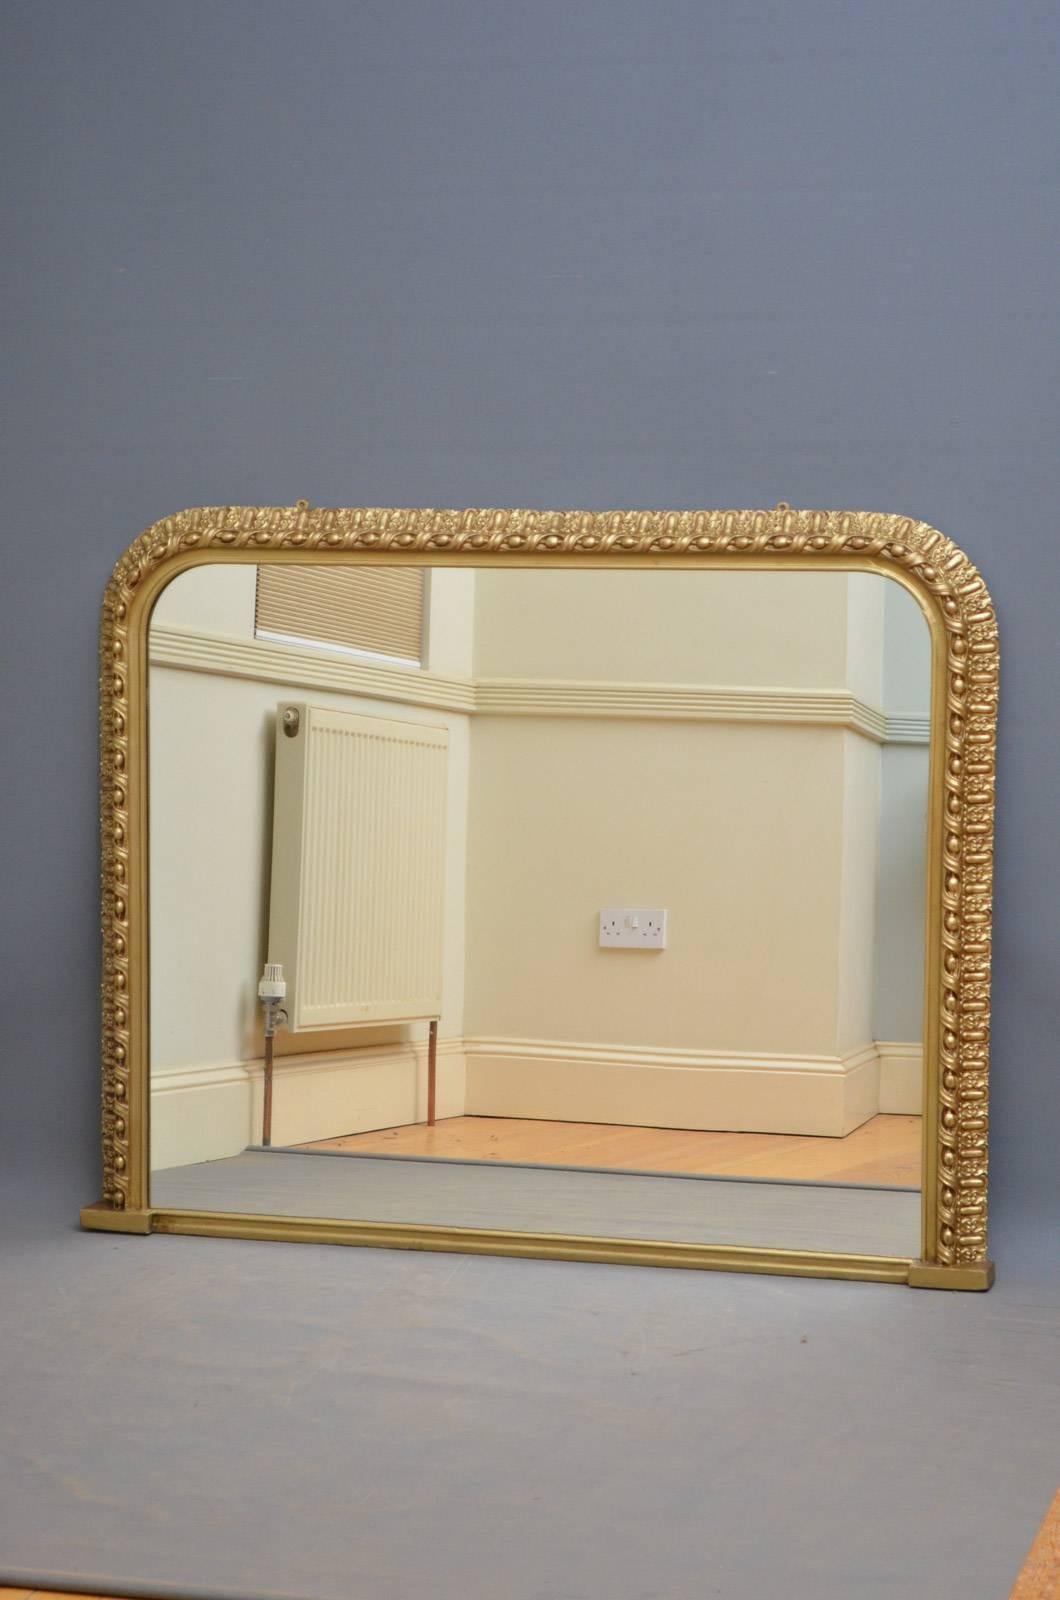 K0297, a large horizontal overmantel mirror, having original mirror plate in finely decorated gilt frame. This Victorian wall mirror has been refinished in the past and is in wonderful condition throughout - ready to place at home, 1870
Measures: H